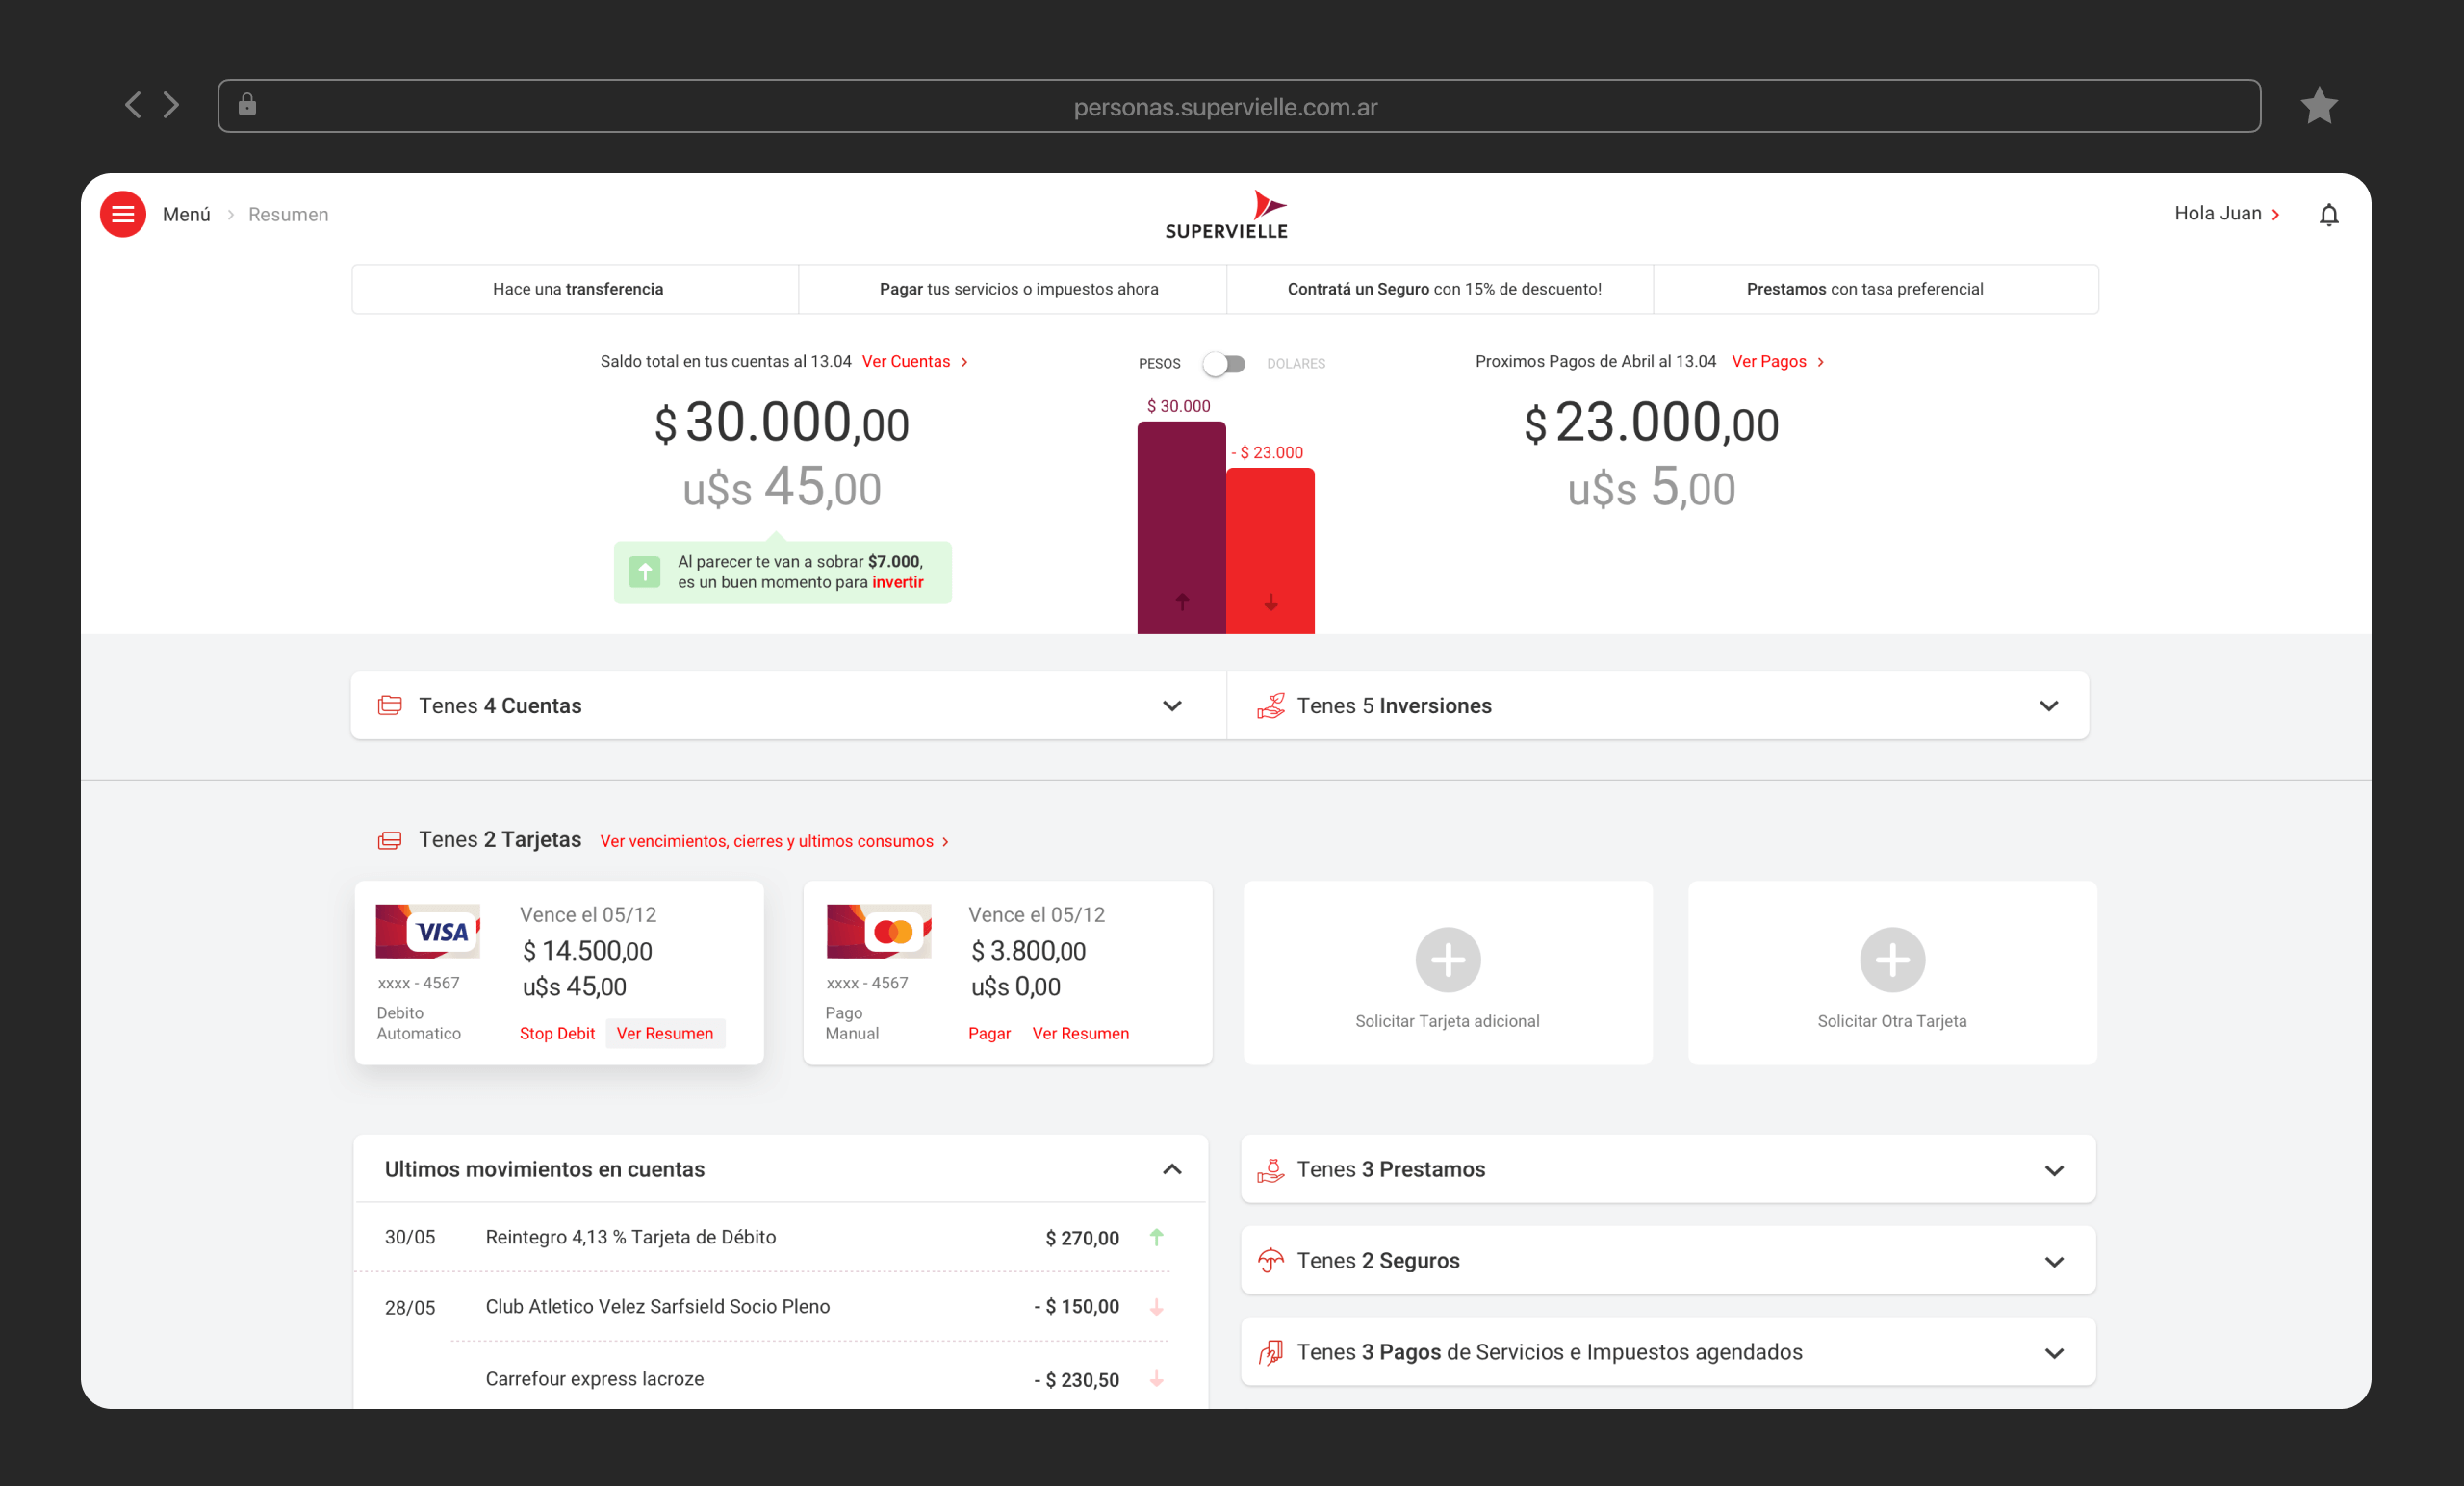 Image of the home screen of the Online Banking desing proposal